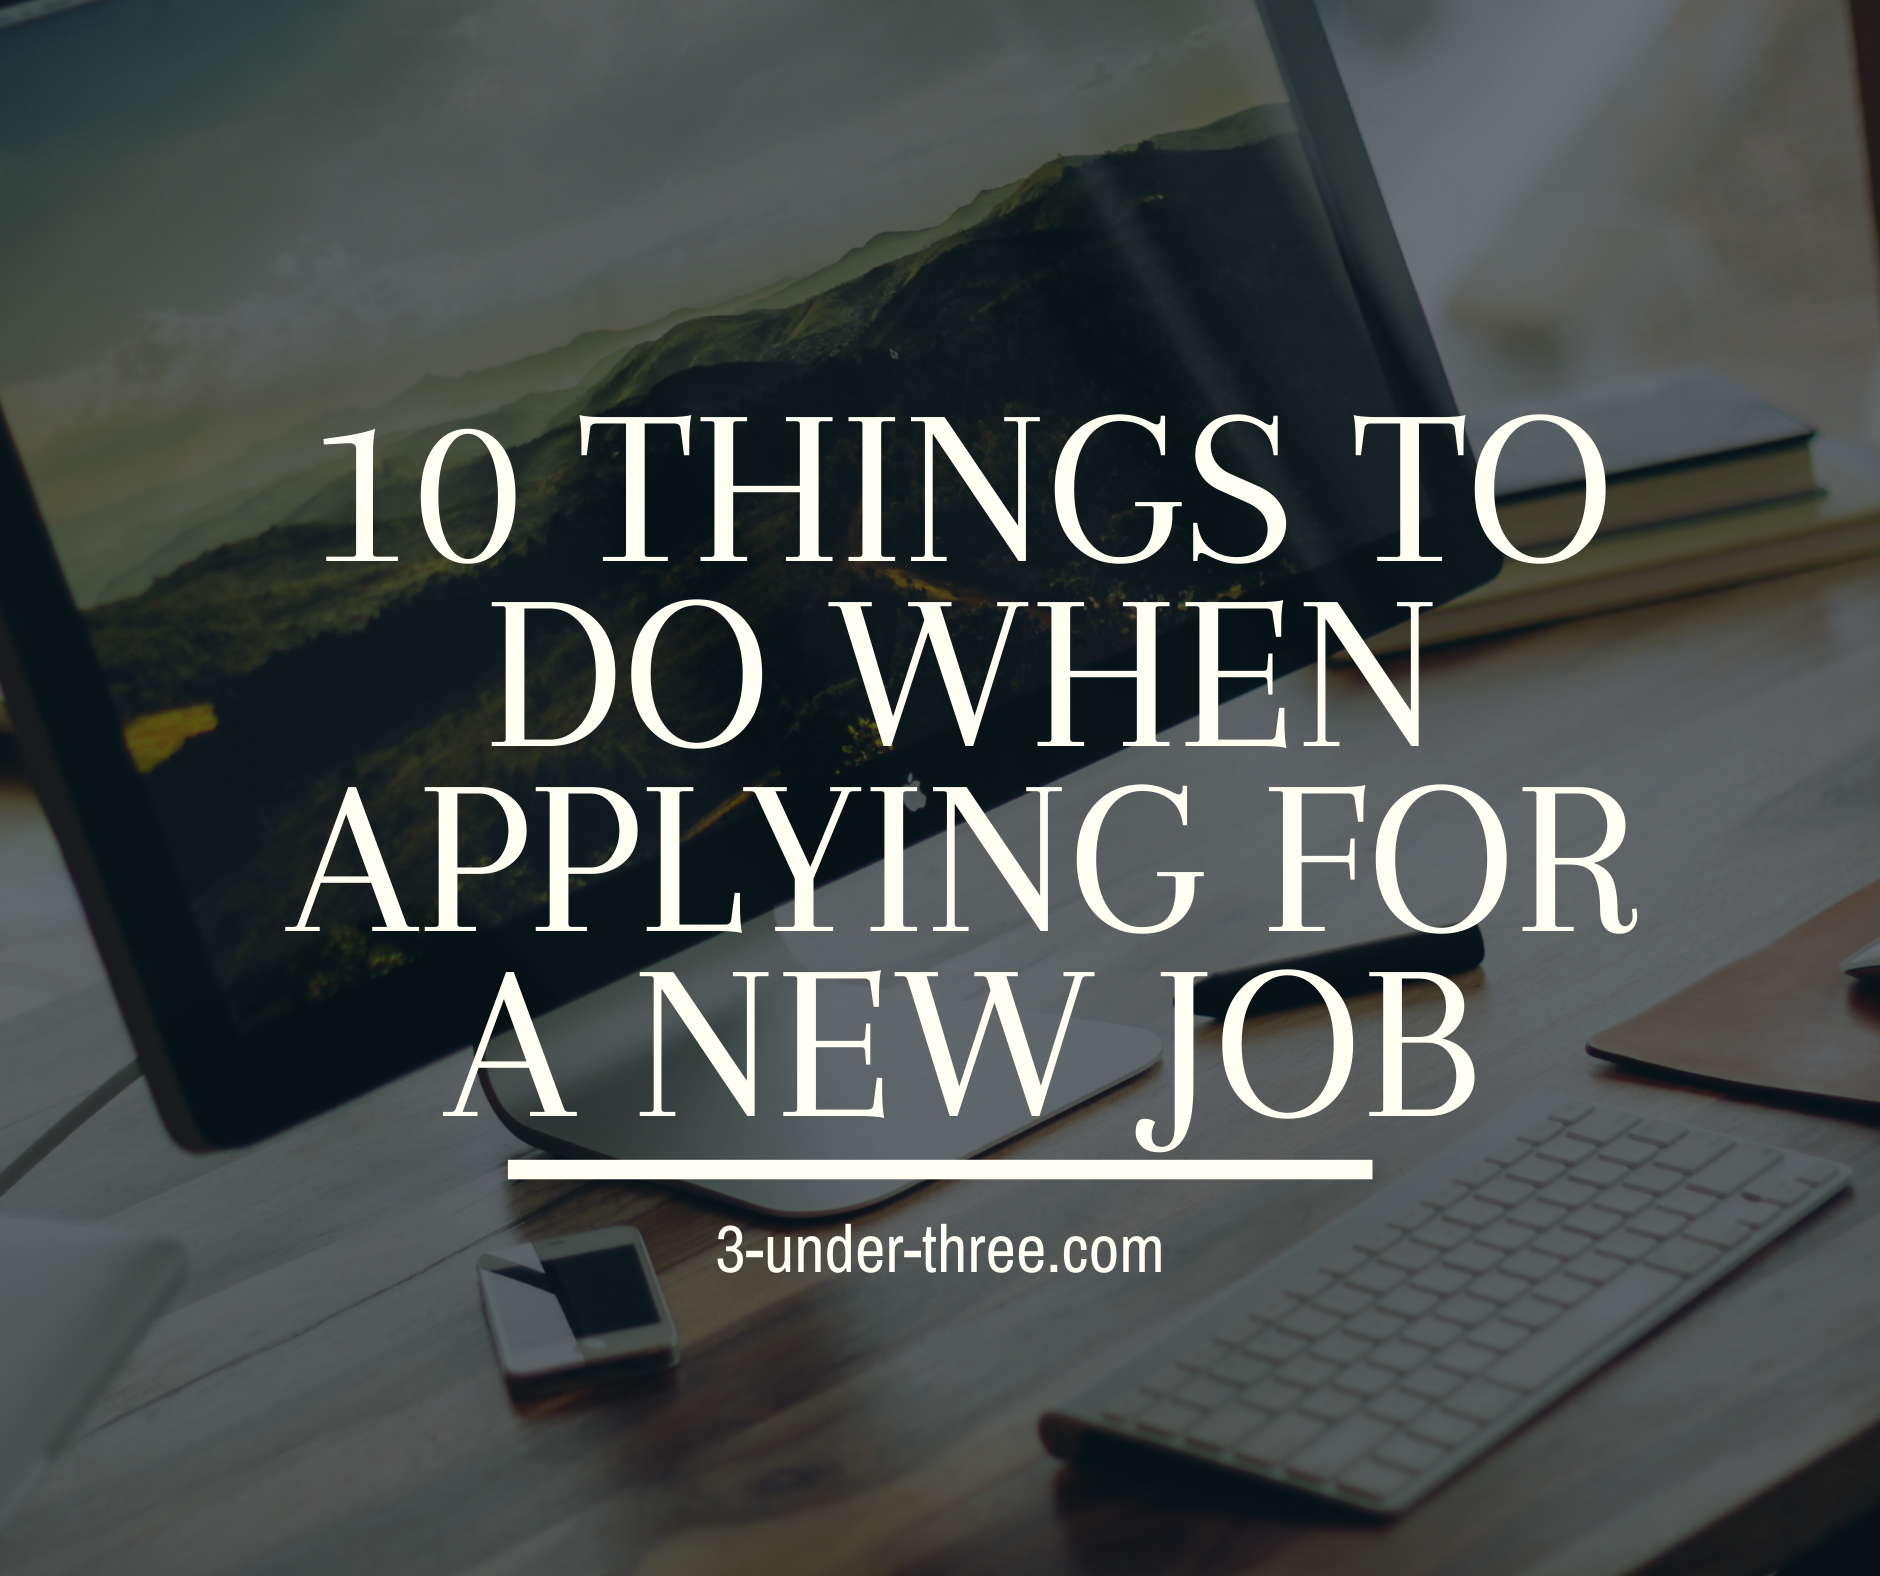 10 Things to Do When Applying for Another Job